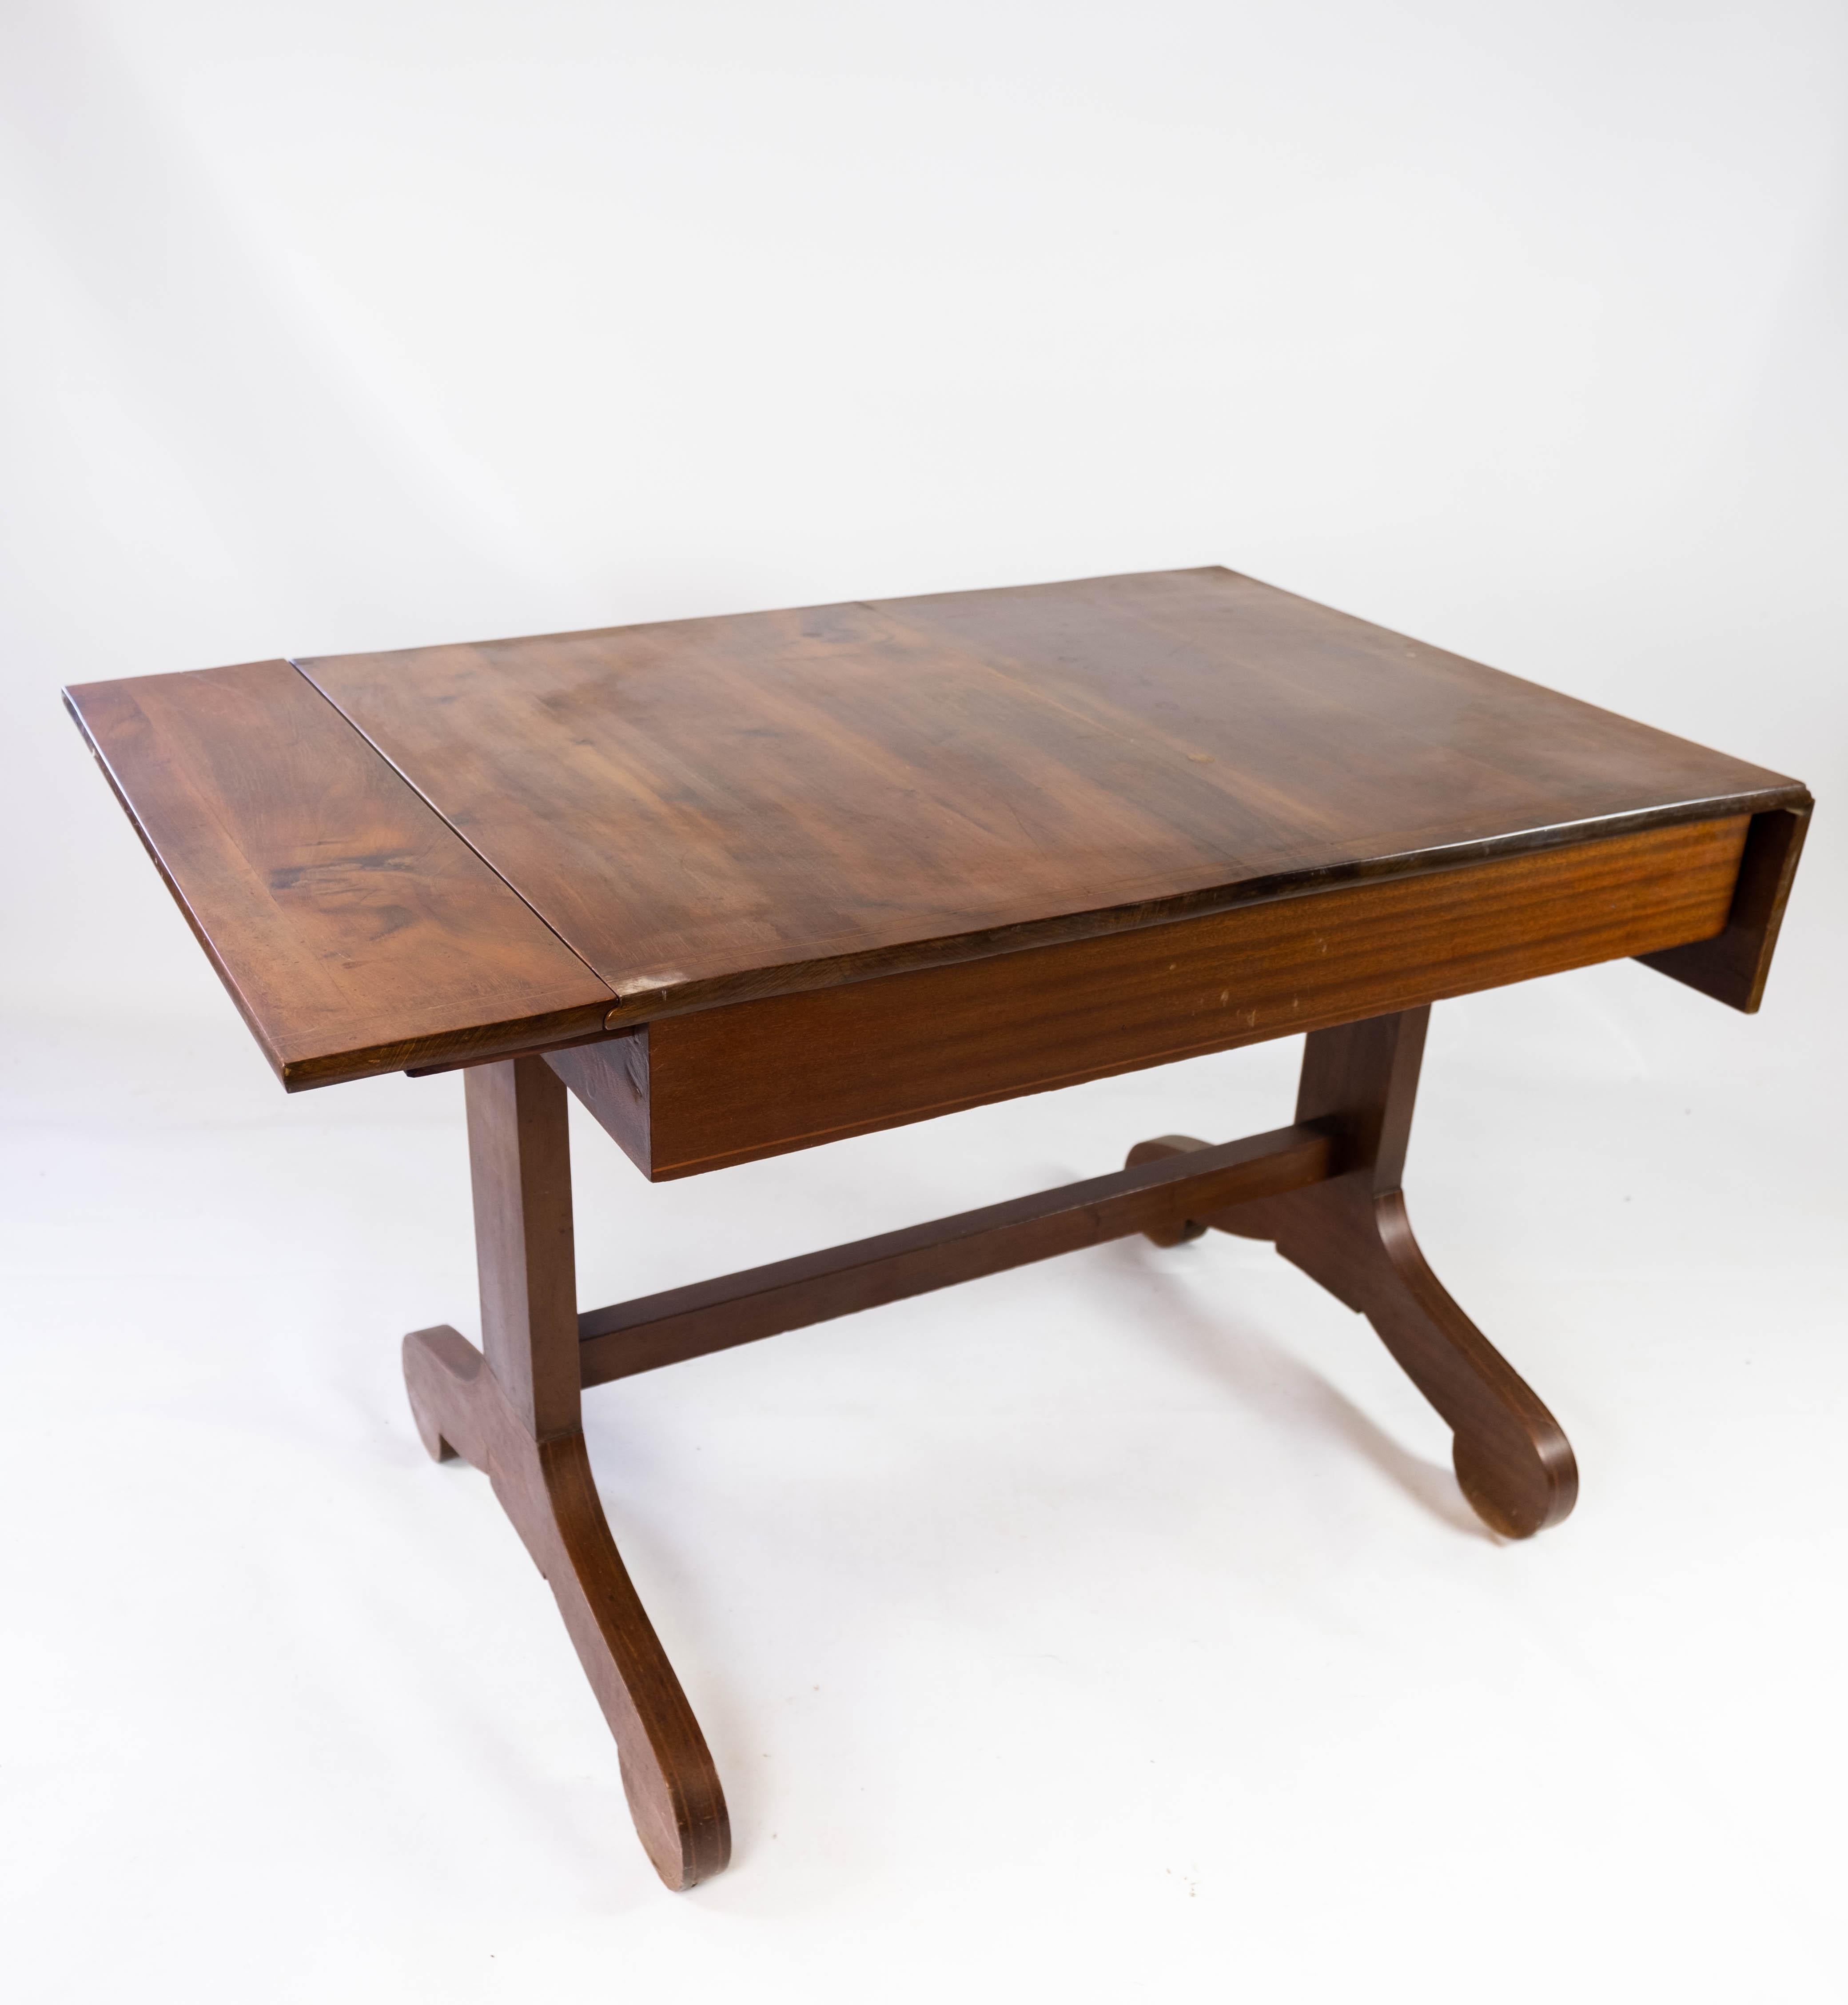 Danish Dining Table with Extensions of Mahogany, 1860s